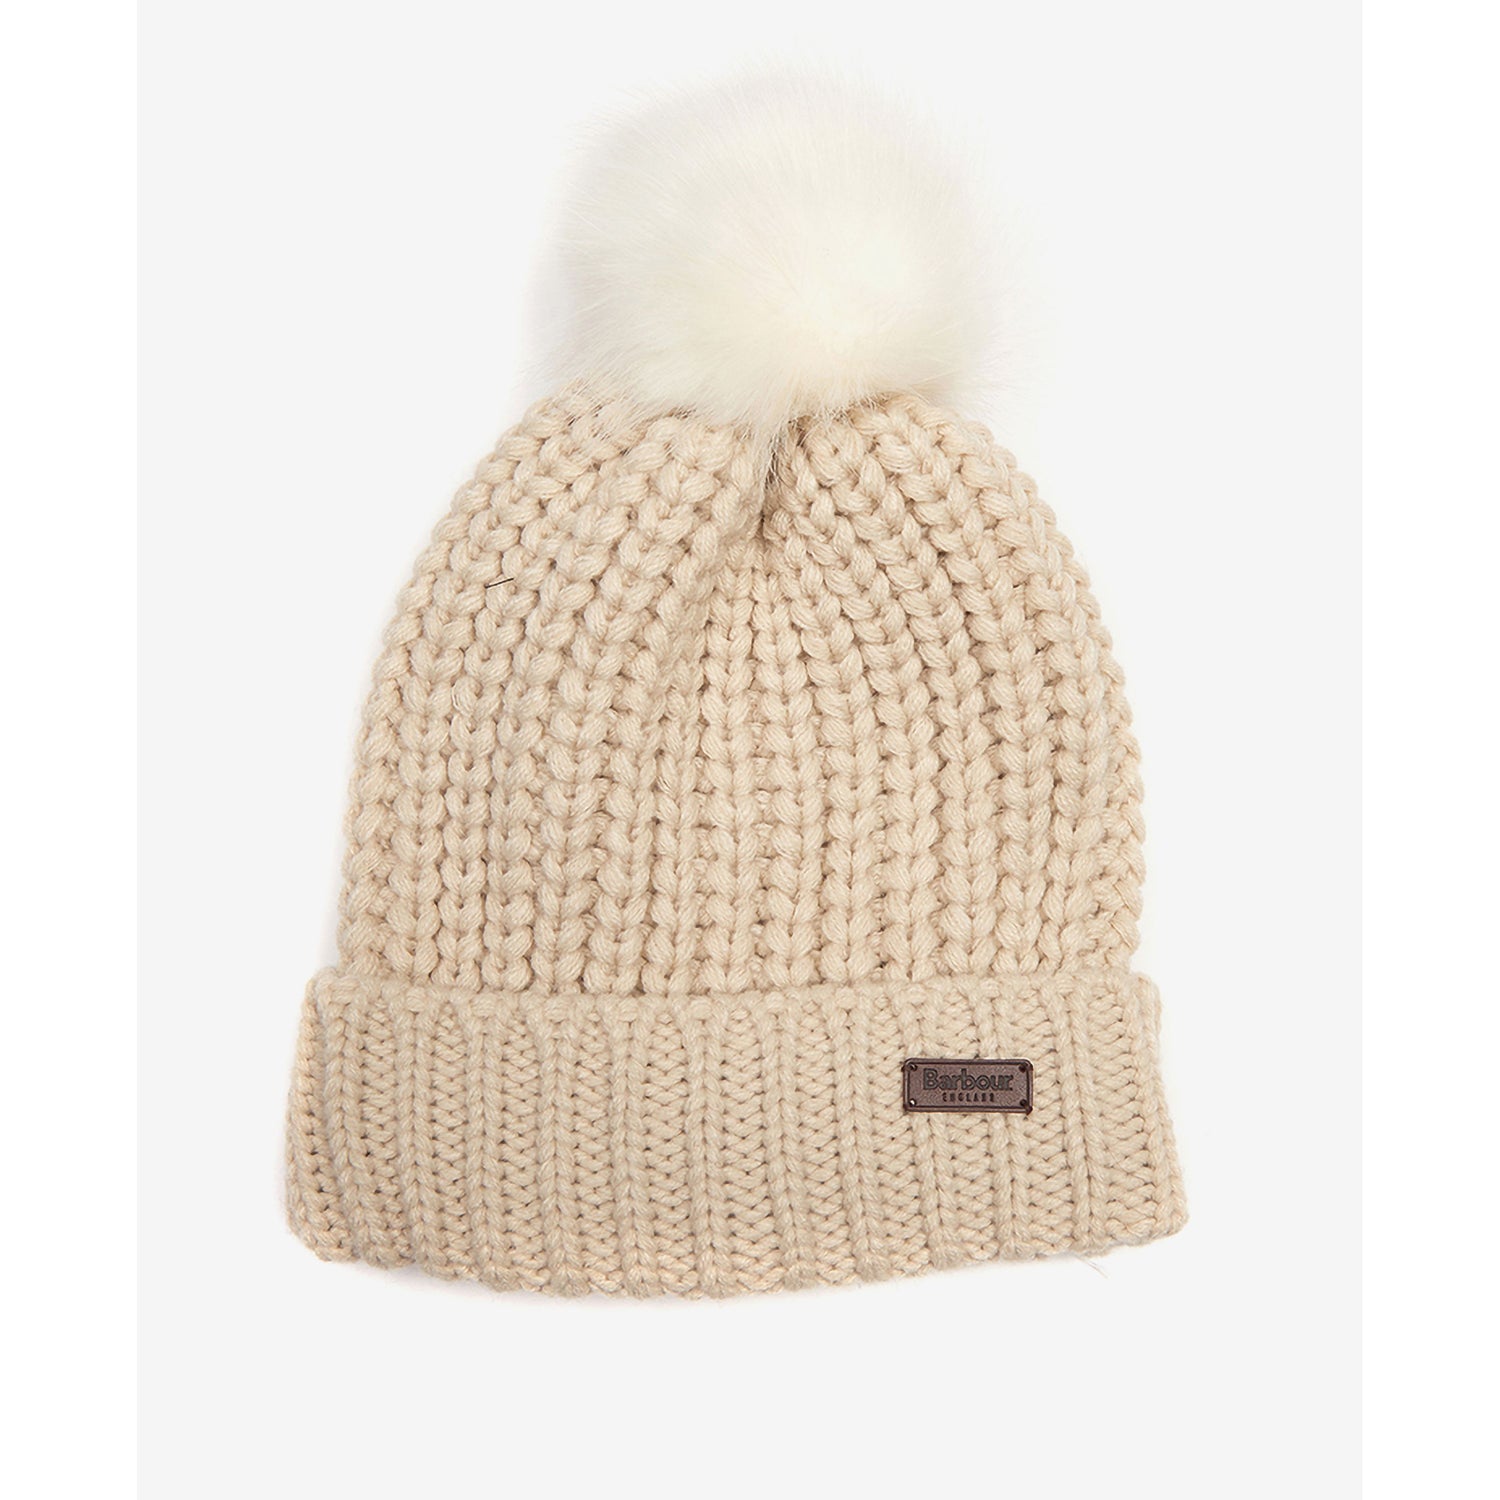 Barbour Saltburn Beanie-Barbour-Blue Water Clothing